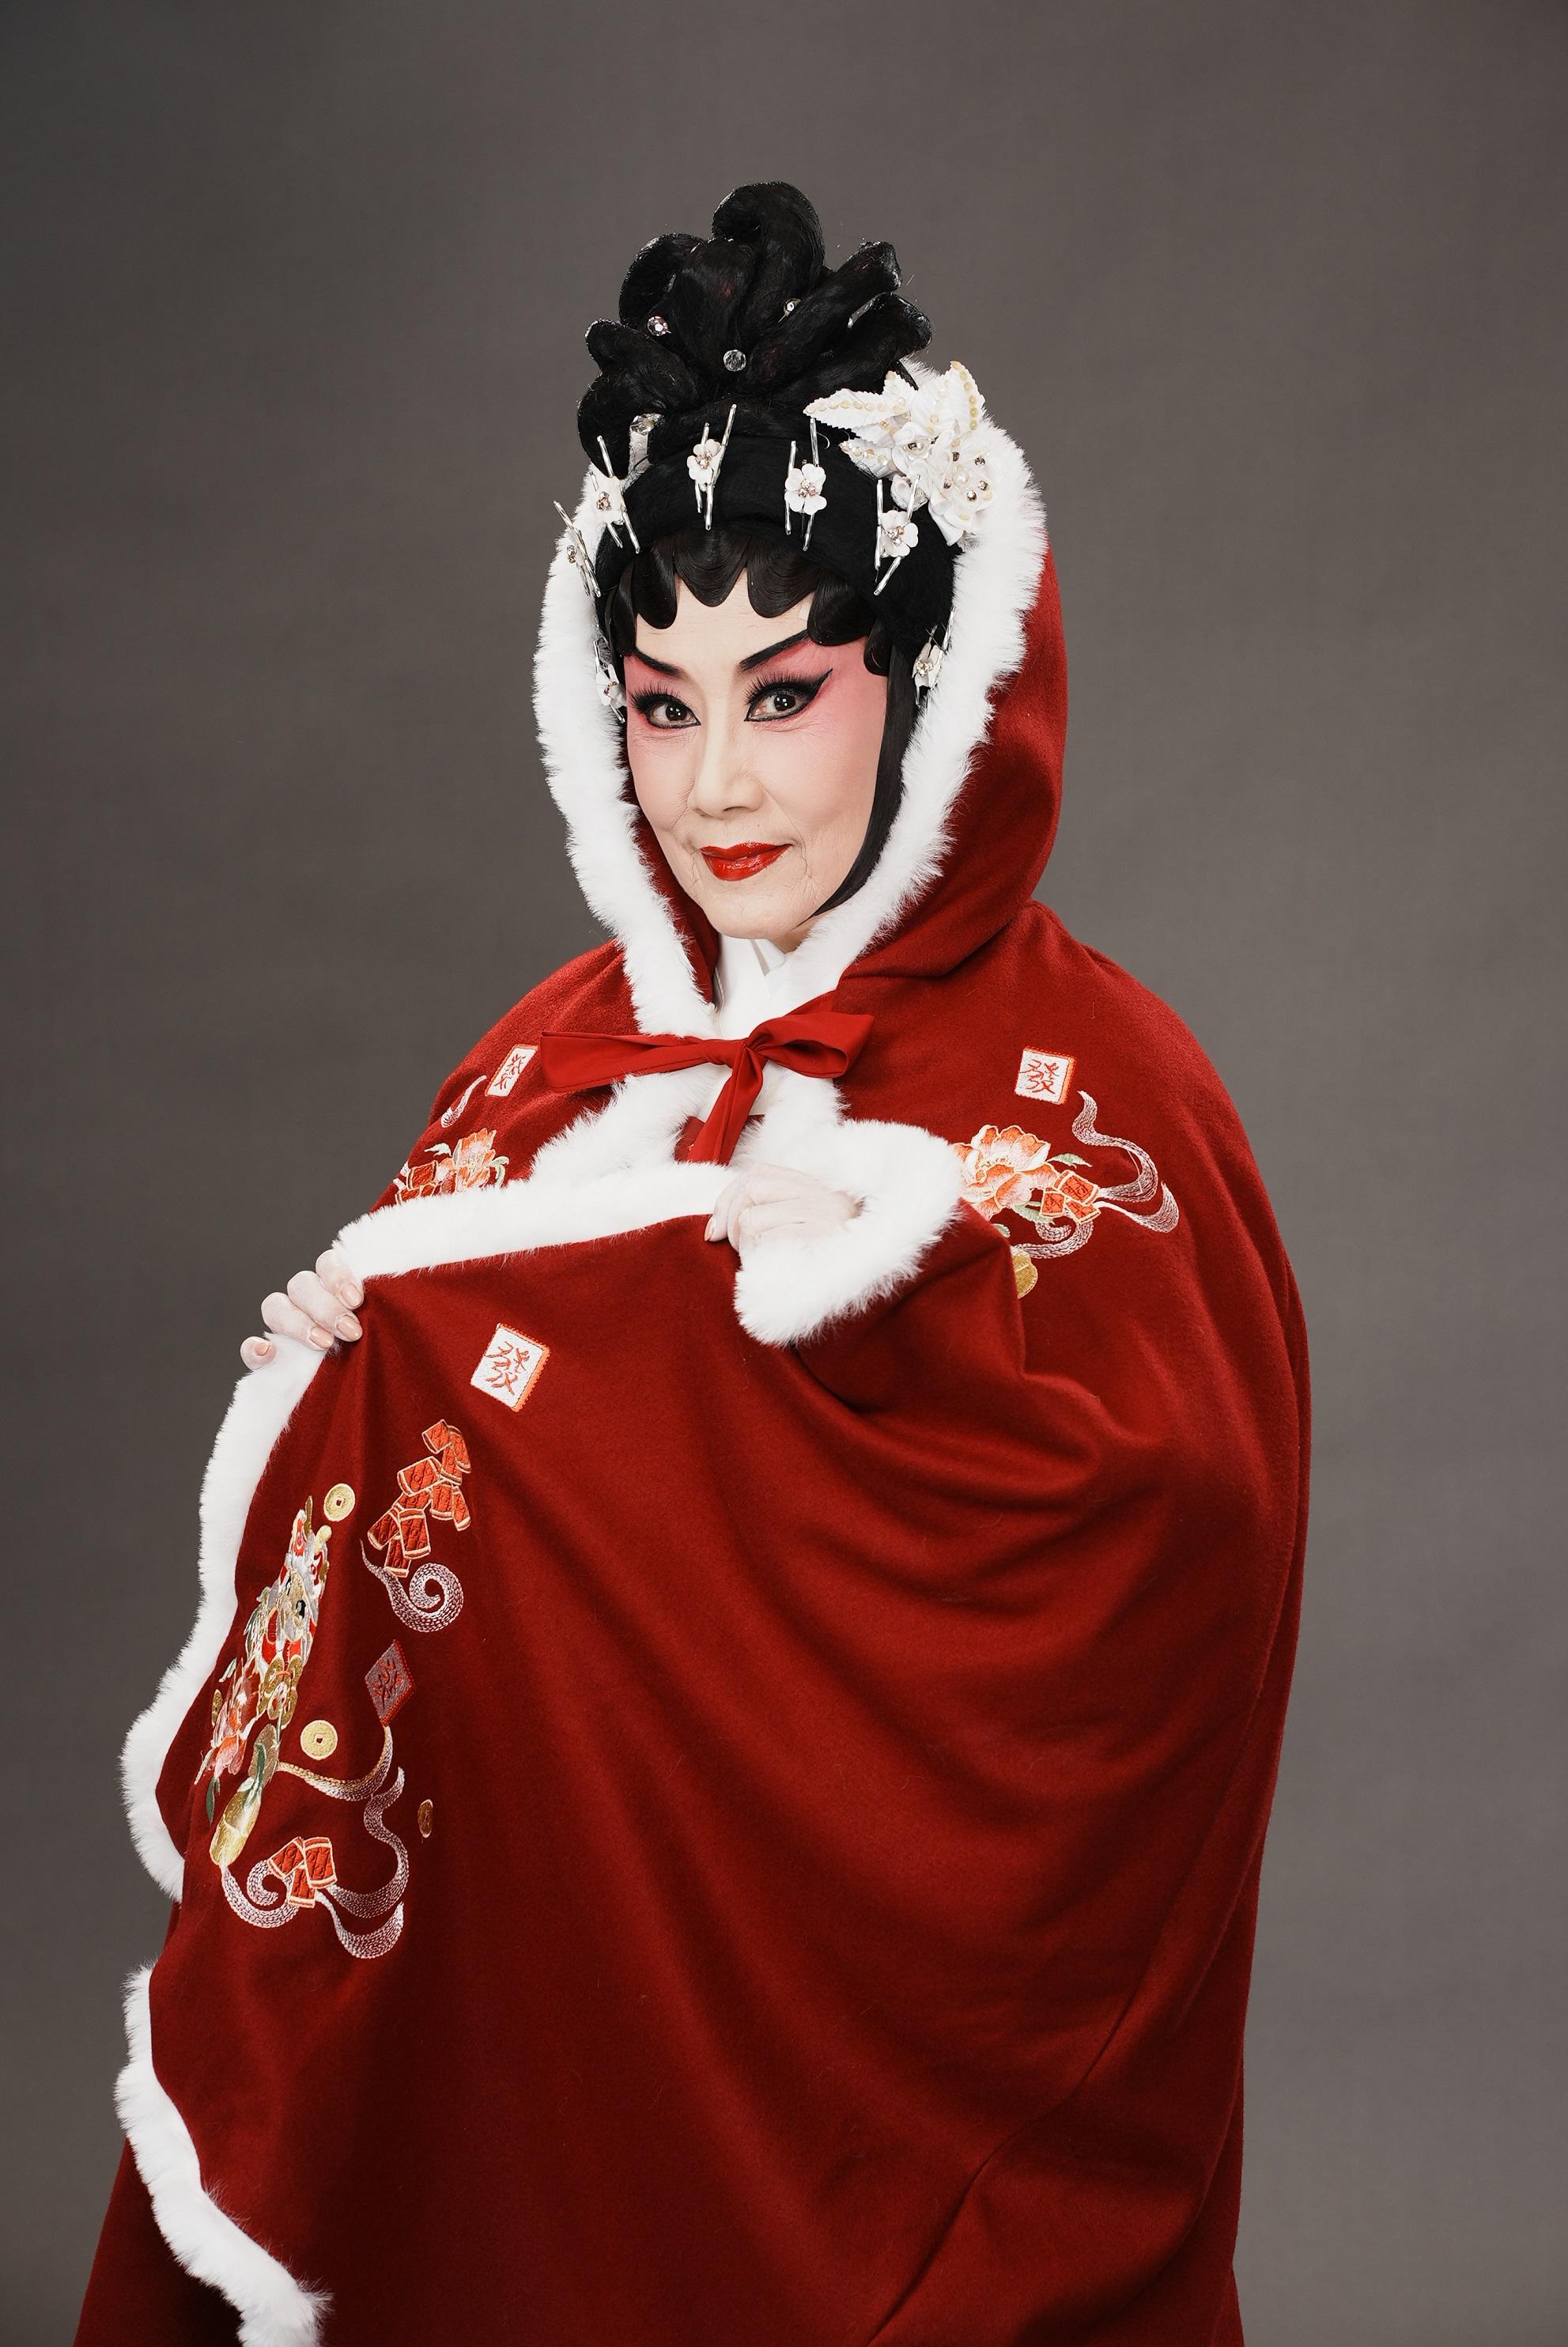 The Leisure and Cultural Services Department will present eight quality programmes at this year's Chinese Opera Festival from June to August. Photo shows famous Cantonese opera artist Liza Wang, who will perform in the "Cyrano de Bergerac" - a Cantonese Opera Interpretation. 